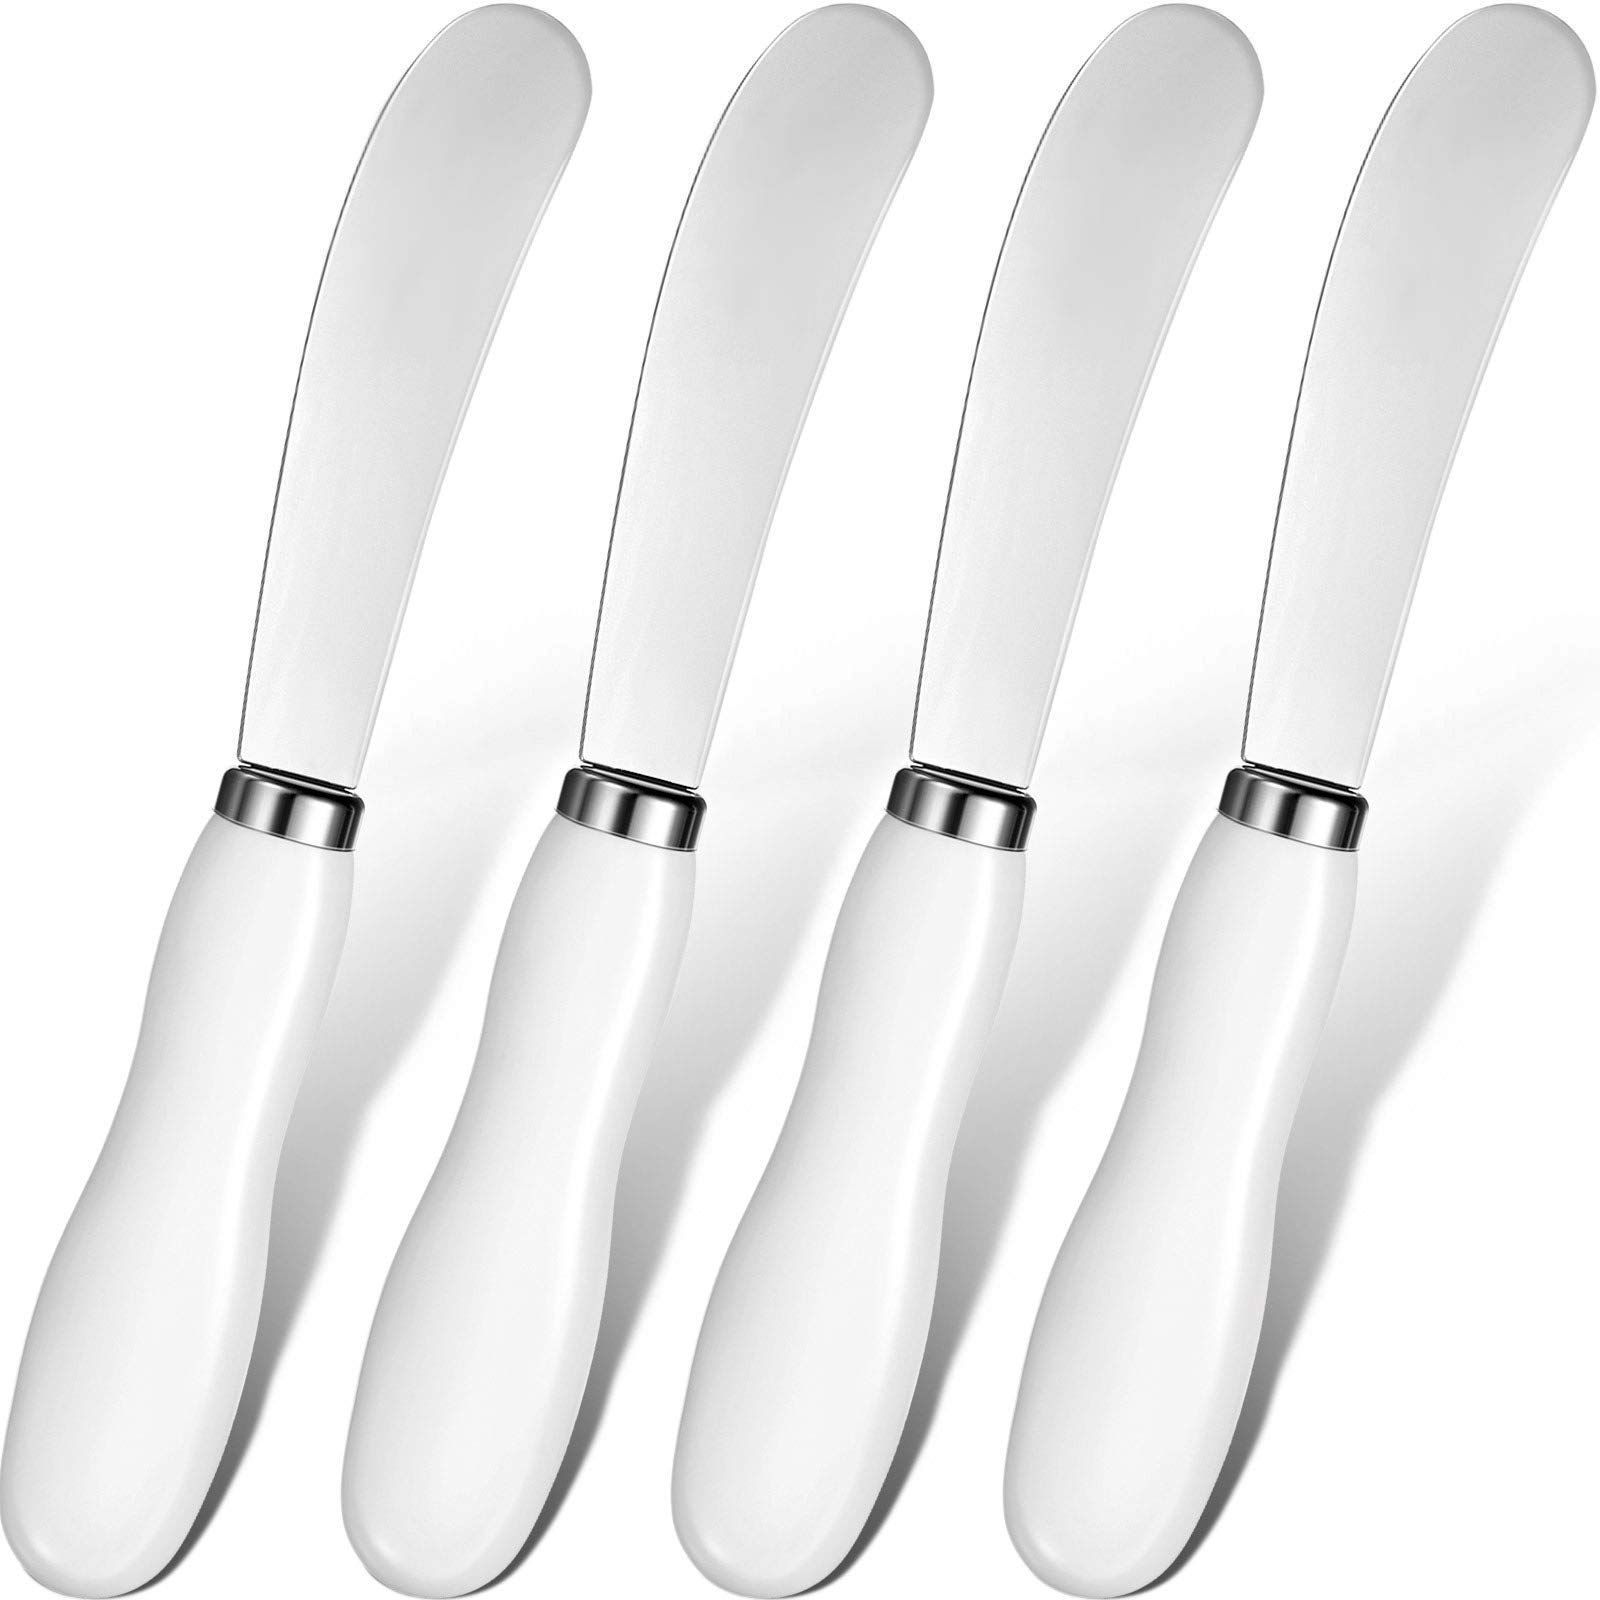 Cheese Spreader Cheese Butter Knife Stainless Steel Spreader Knife with White Porcelain Handles Multipurpose Cheese Butter Spreader Knives for Kitchen Use 5.74 Inch (4)